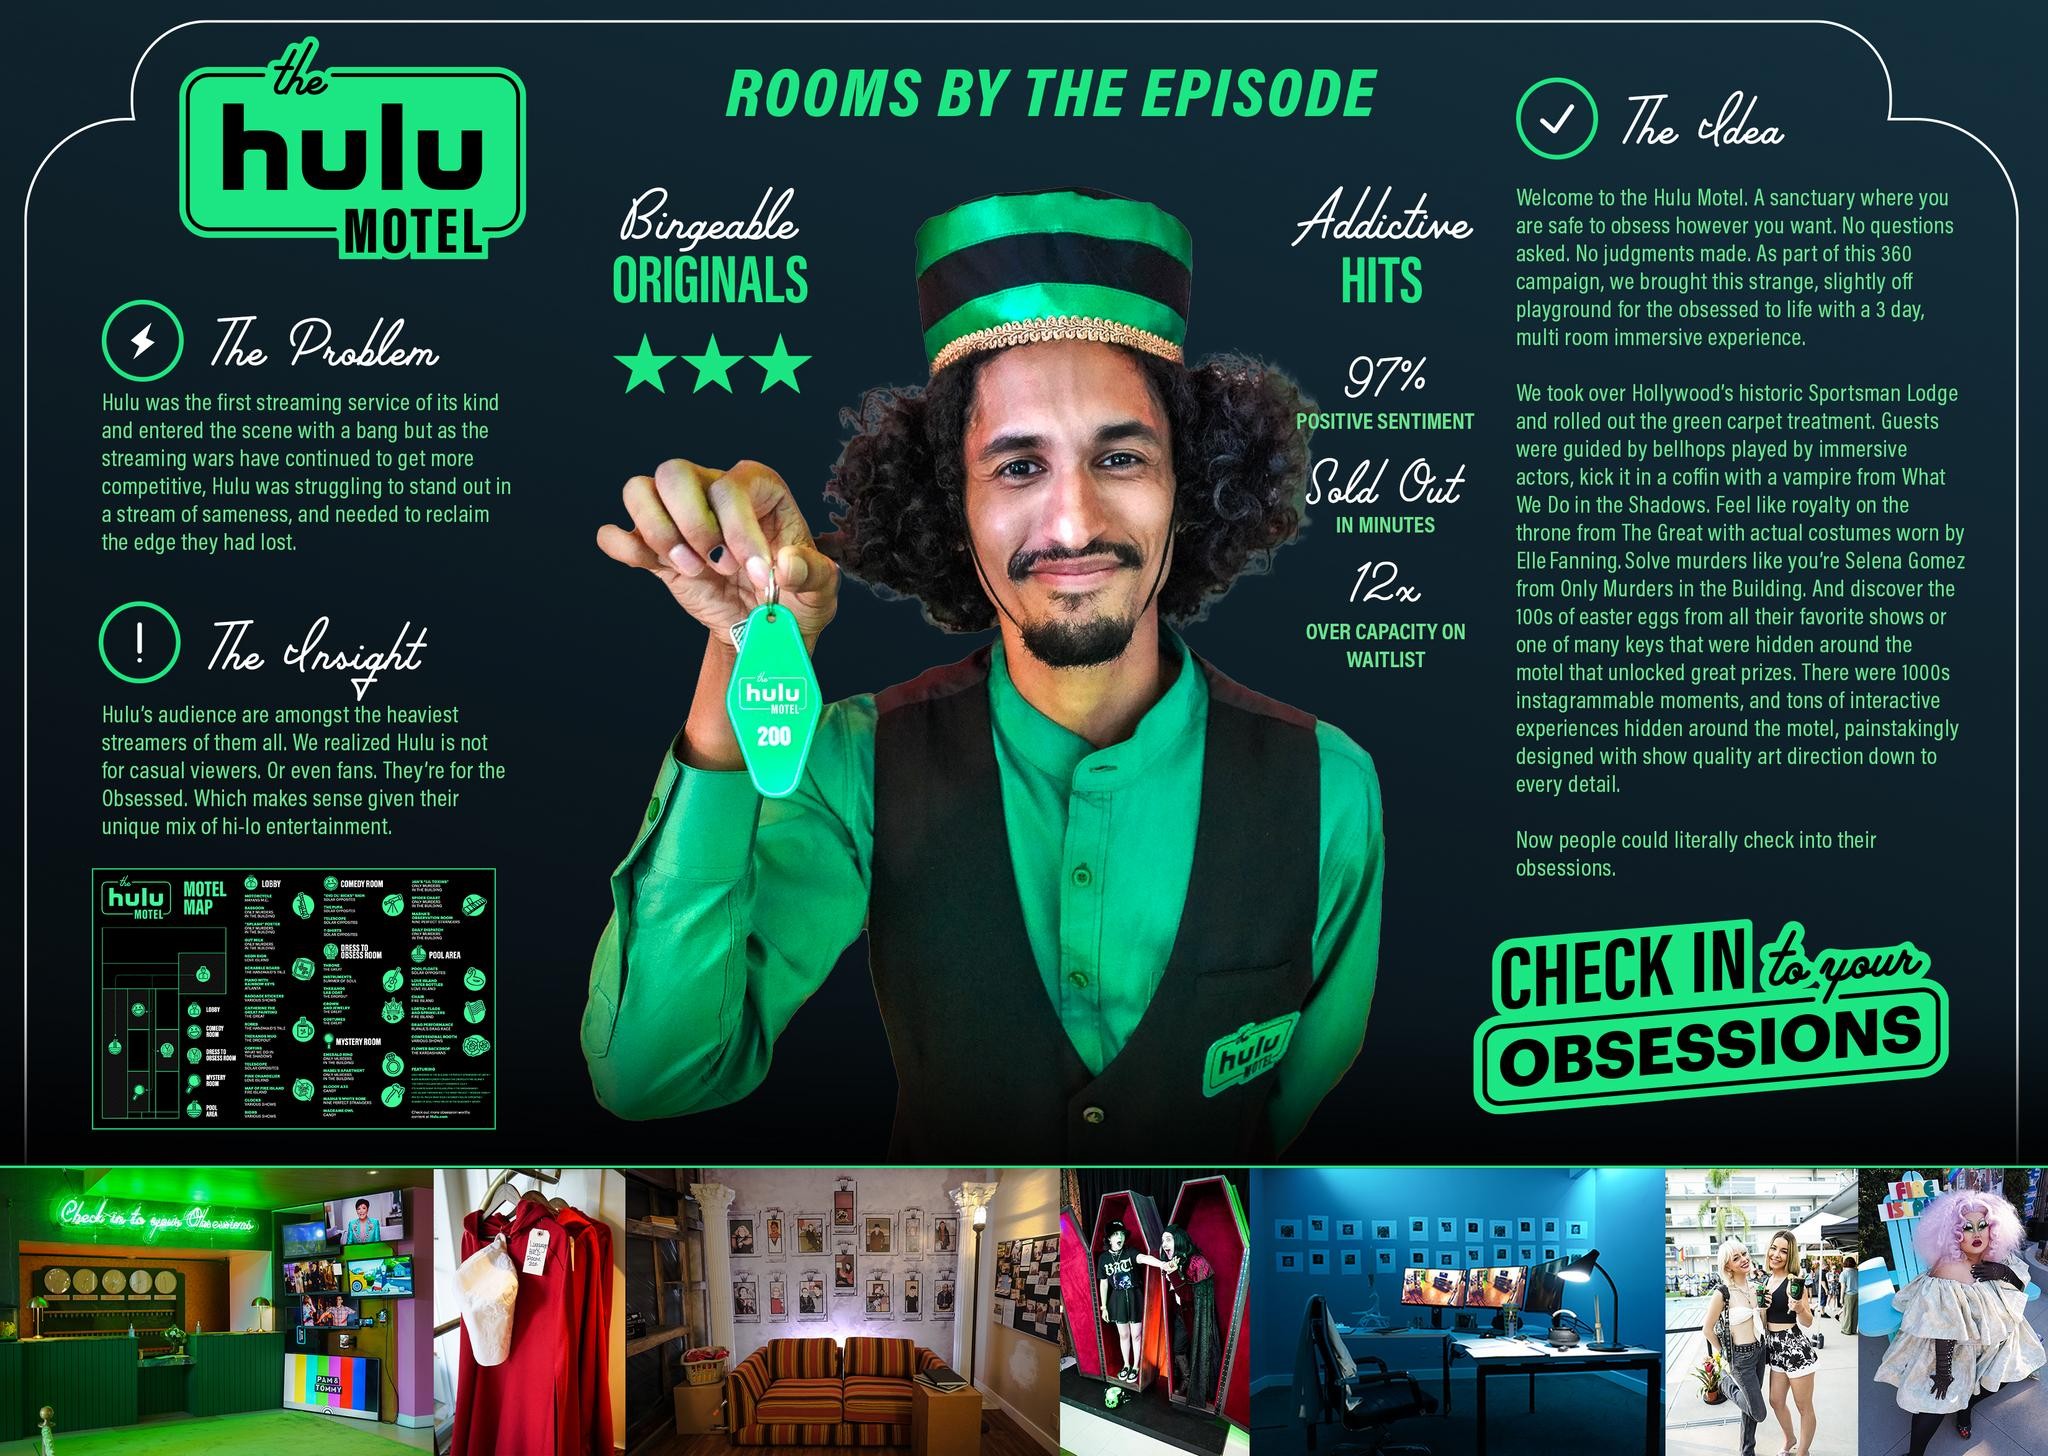 Hulu: Check Into Your Obsessions